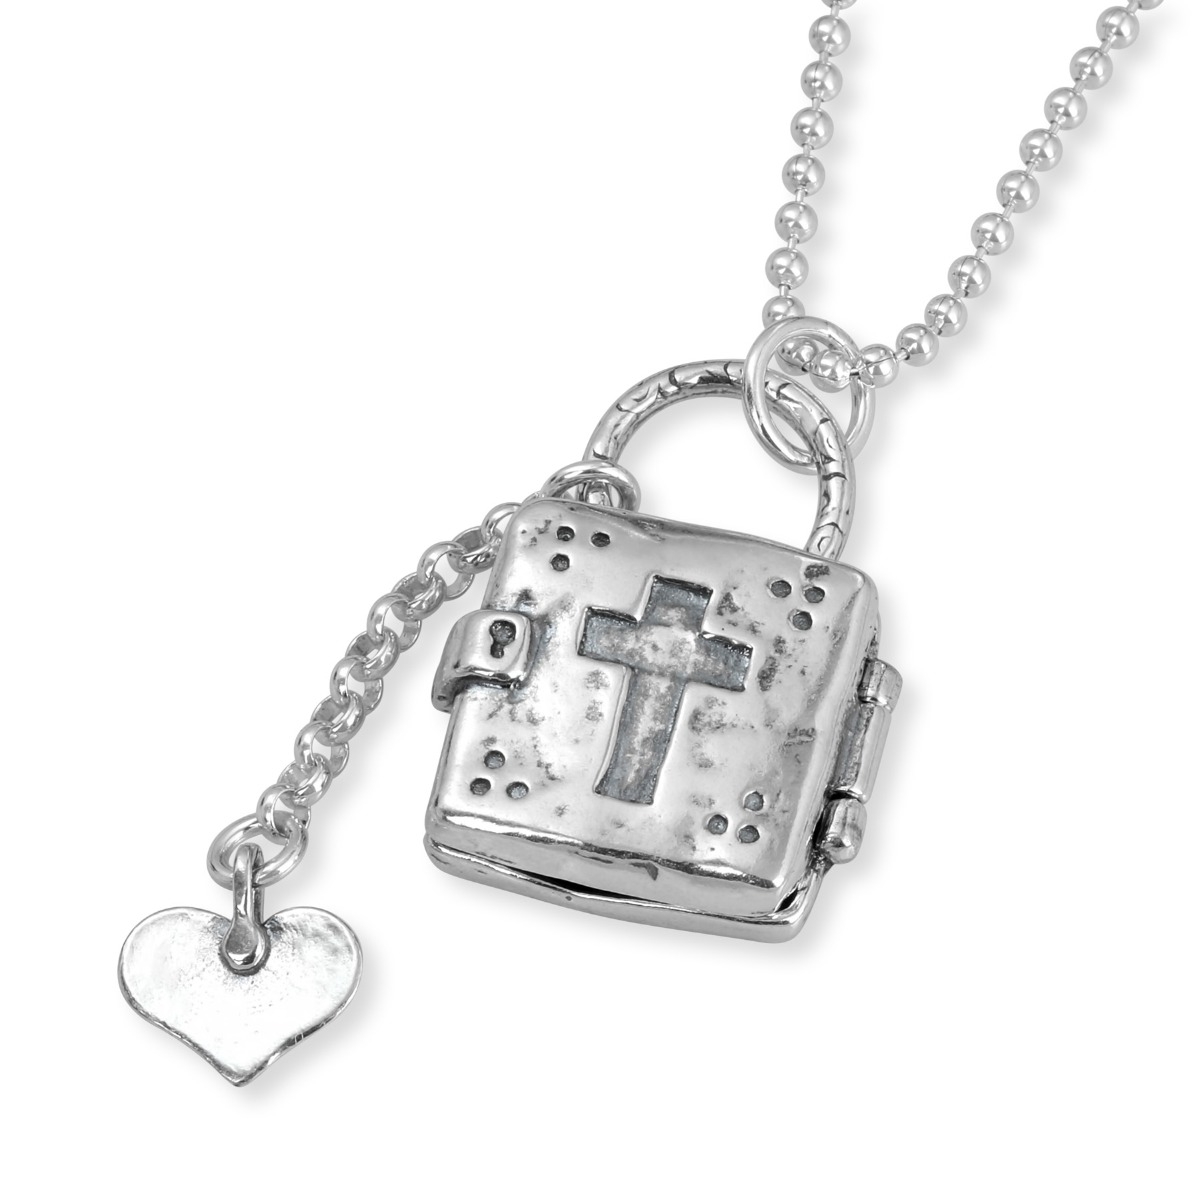 925 Sterling Silver Roman Cross Padlock Locket Necklace with Floating Heart Charm - 1